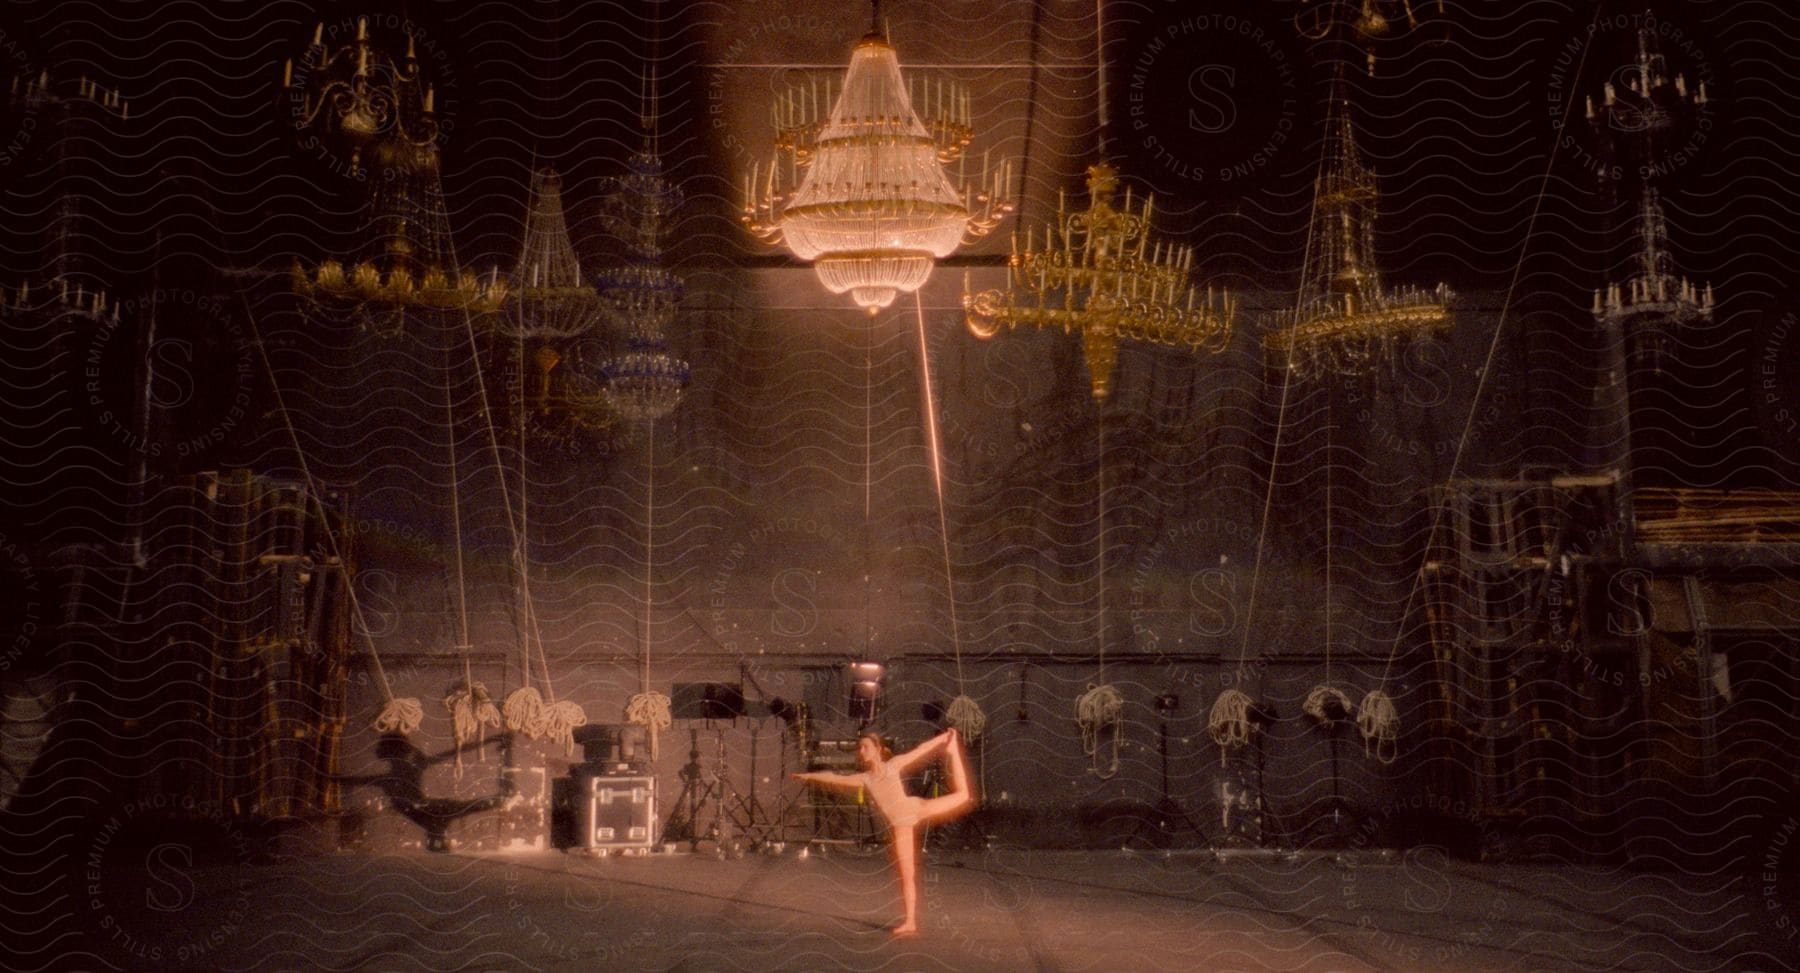 A female ballet dancer performs alone in a theater surrounded by chandeliers and other props